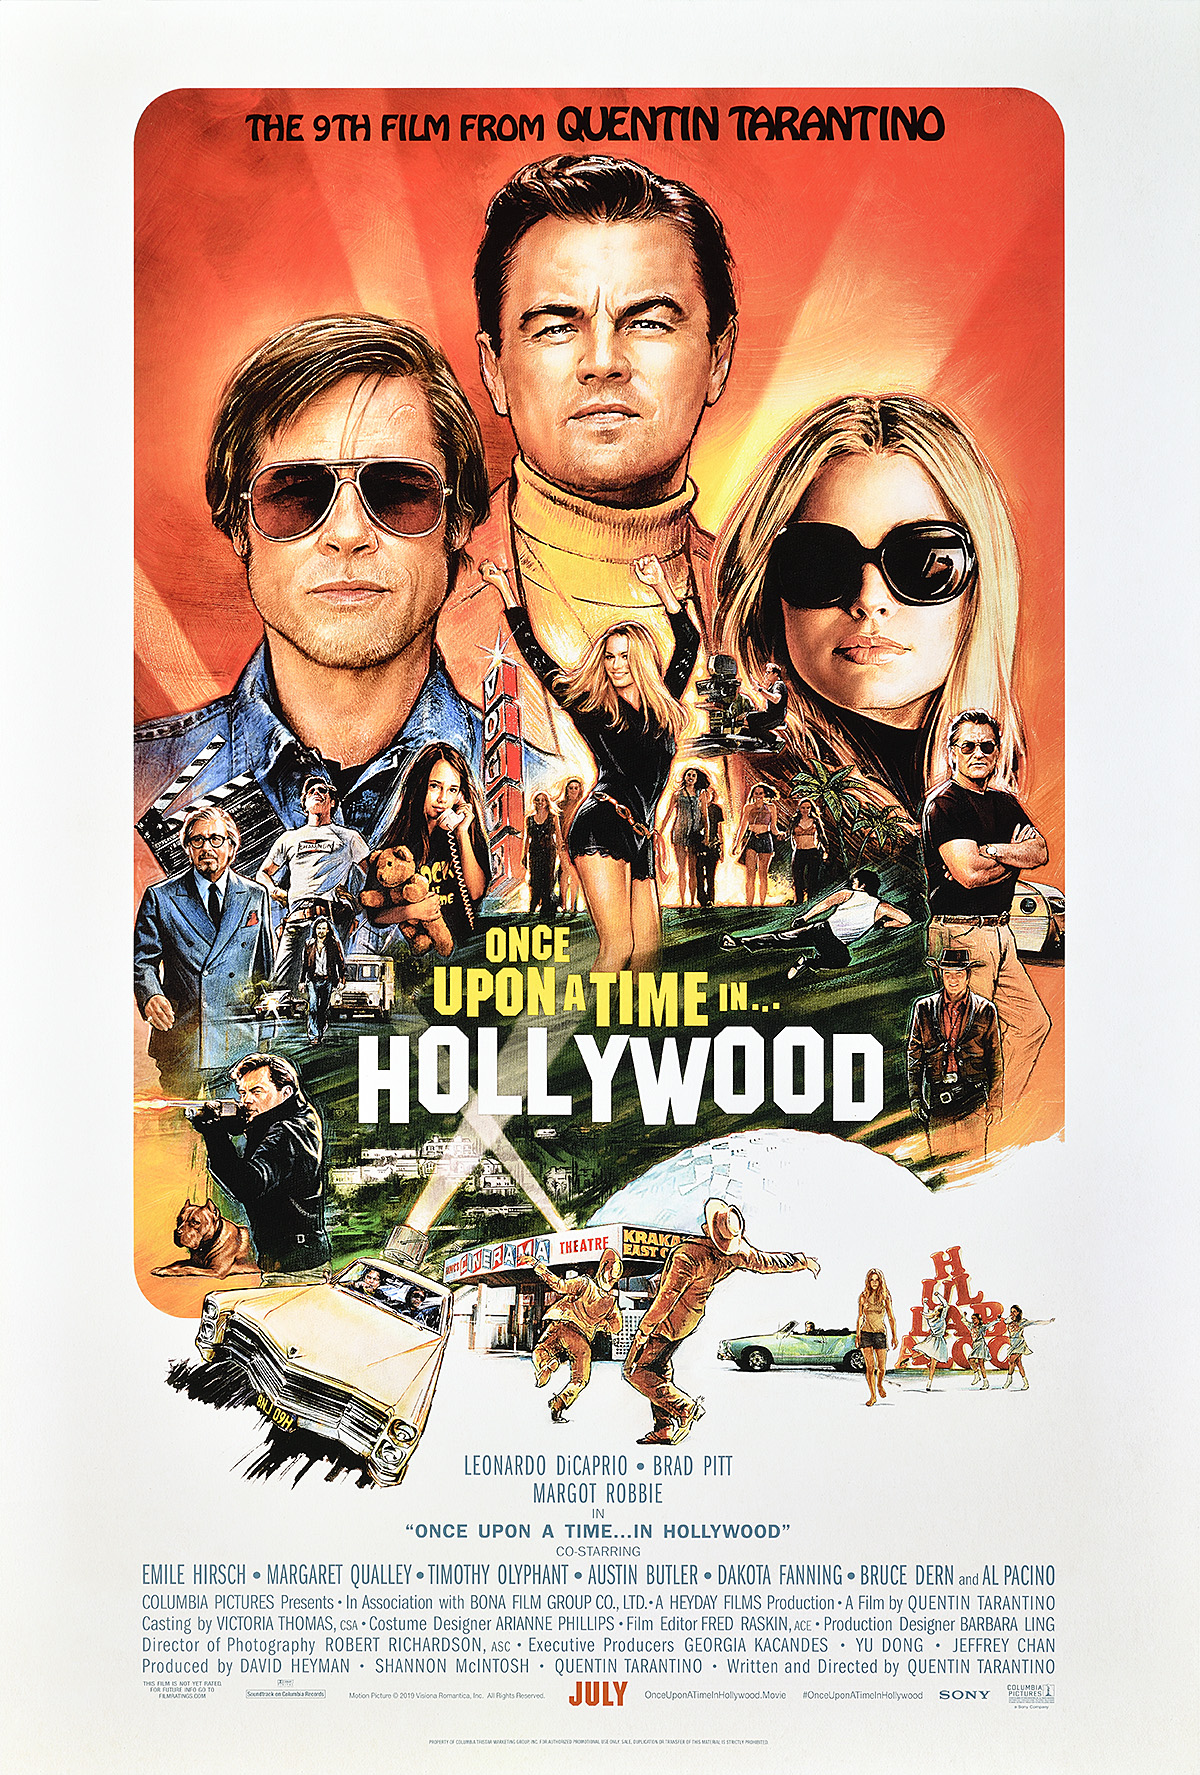 An illustration-style poster of various Hollywood style scenes in front of 2 men and a woman.